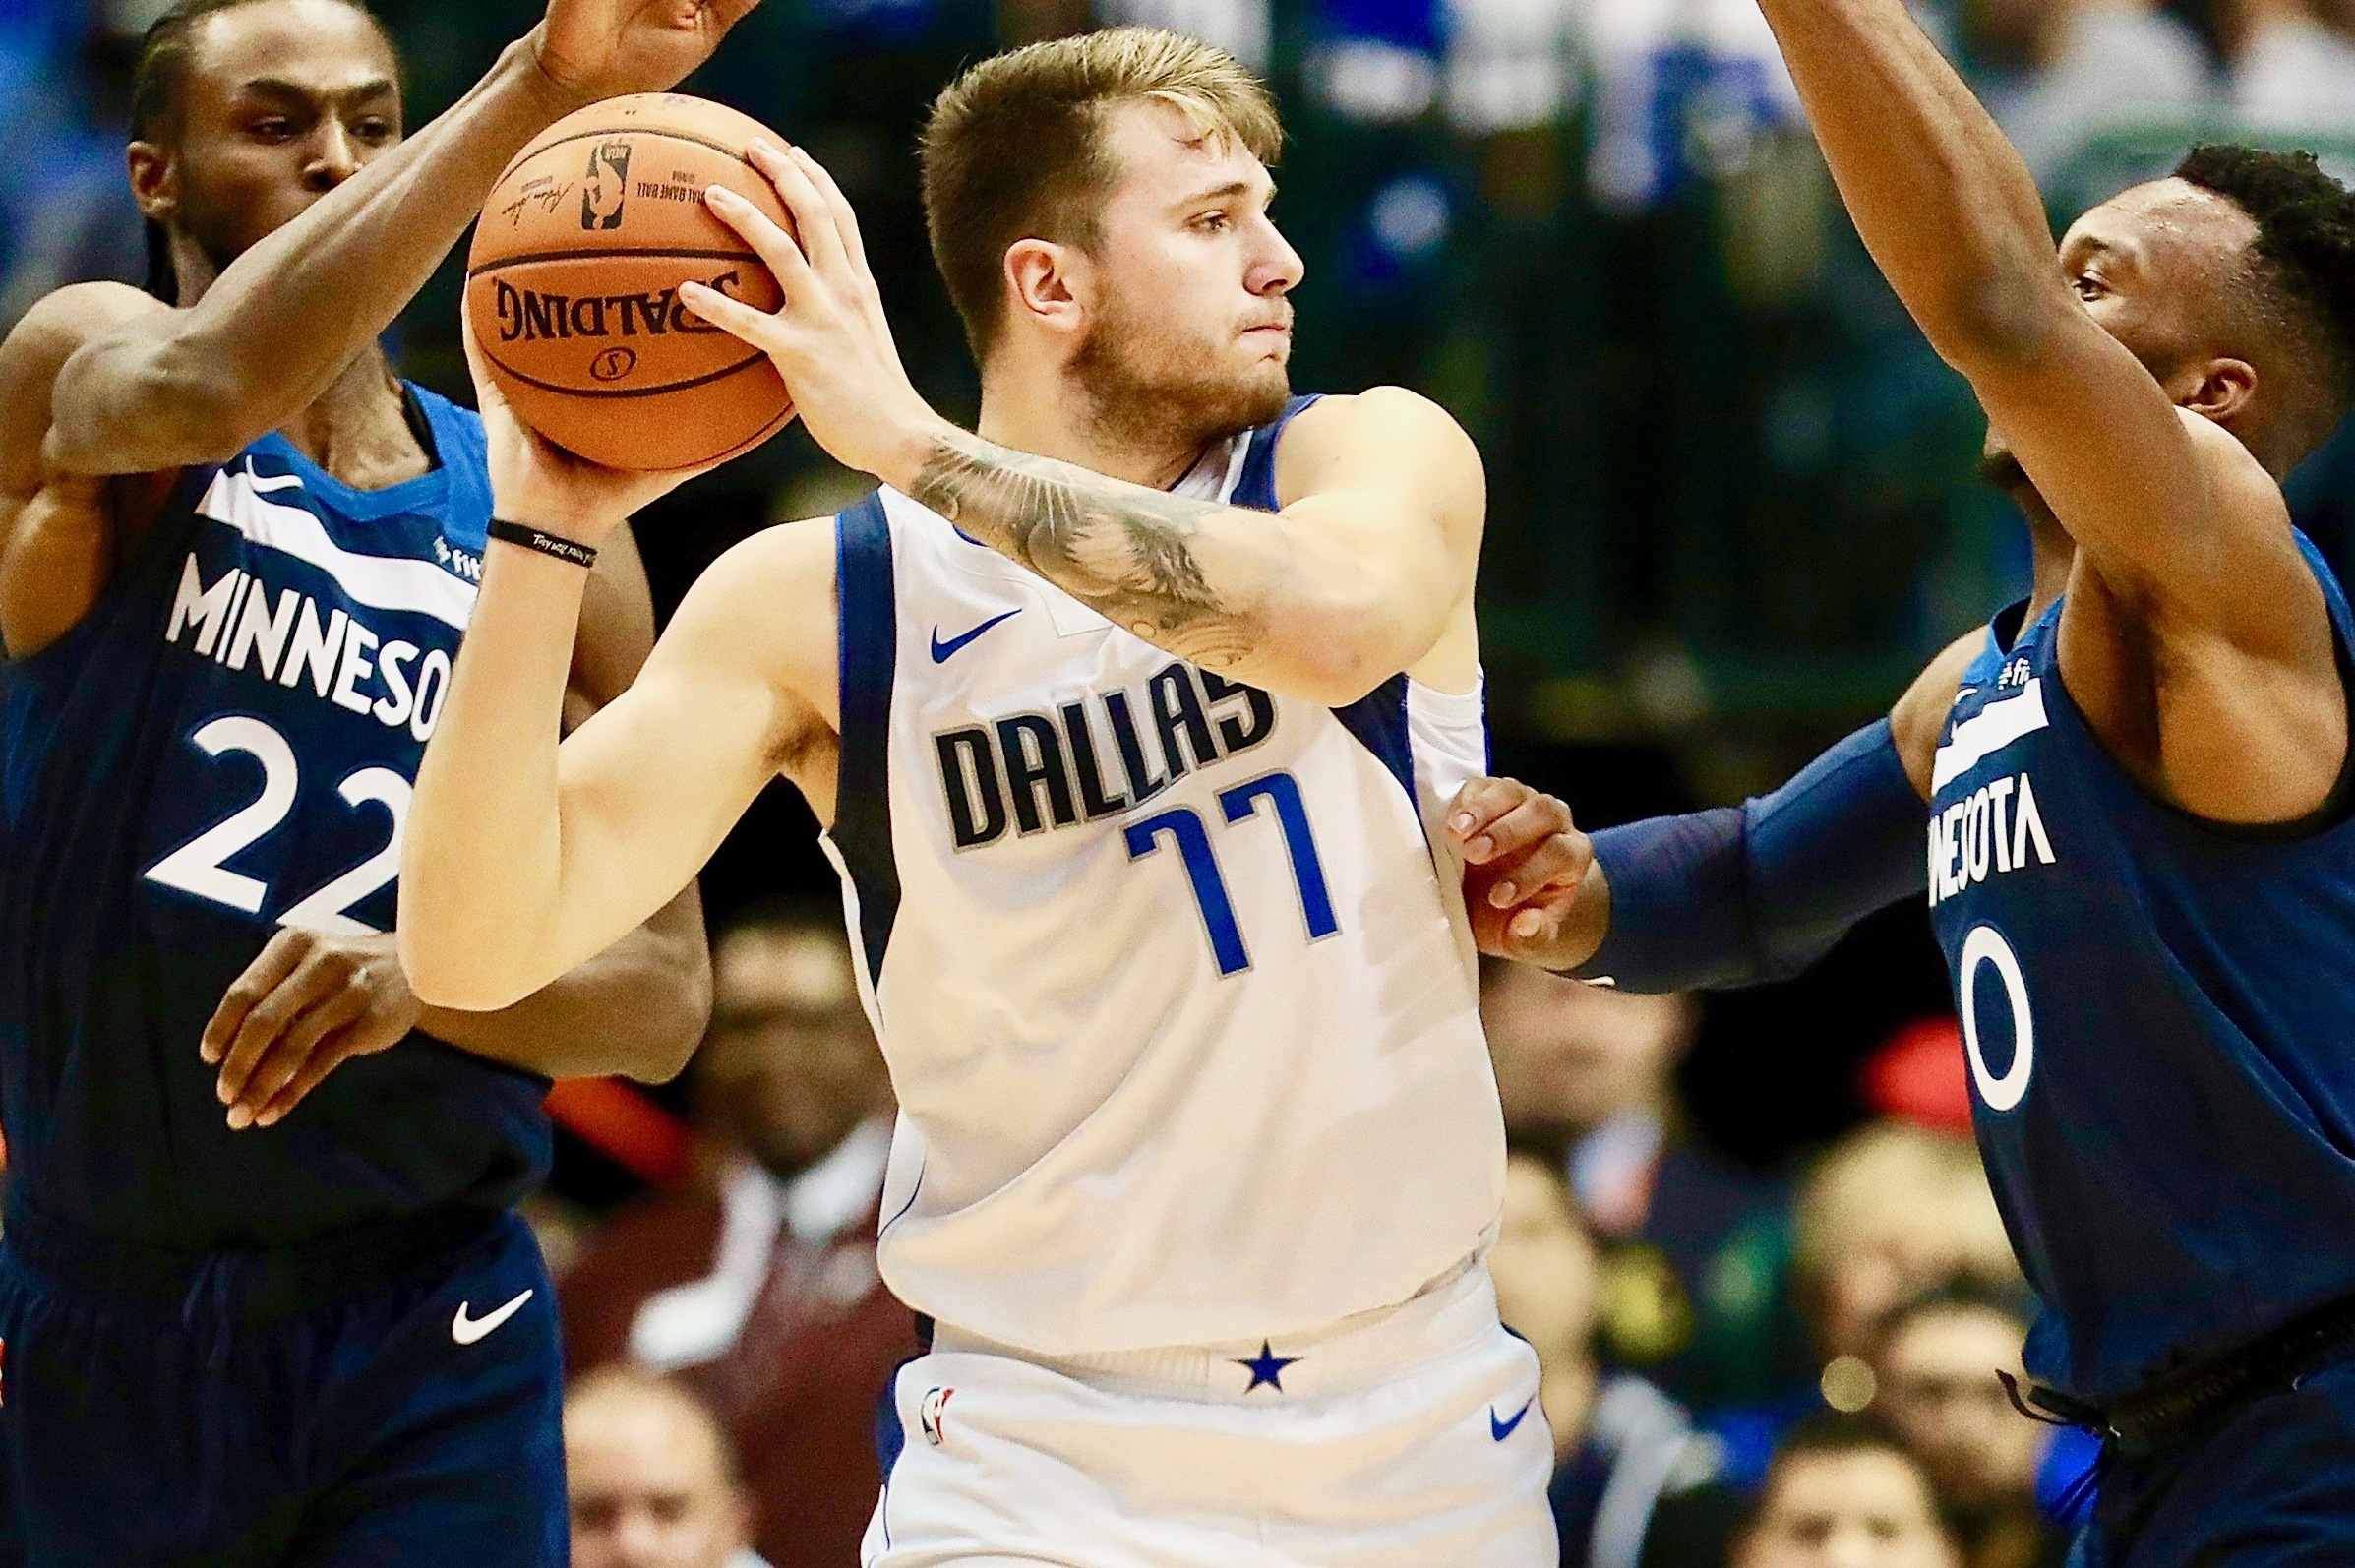 Luka, Luka, Luka: NBA GM survey sees Mavs' Luka Doncic getting votes for  best player at 3 different positions